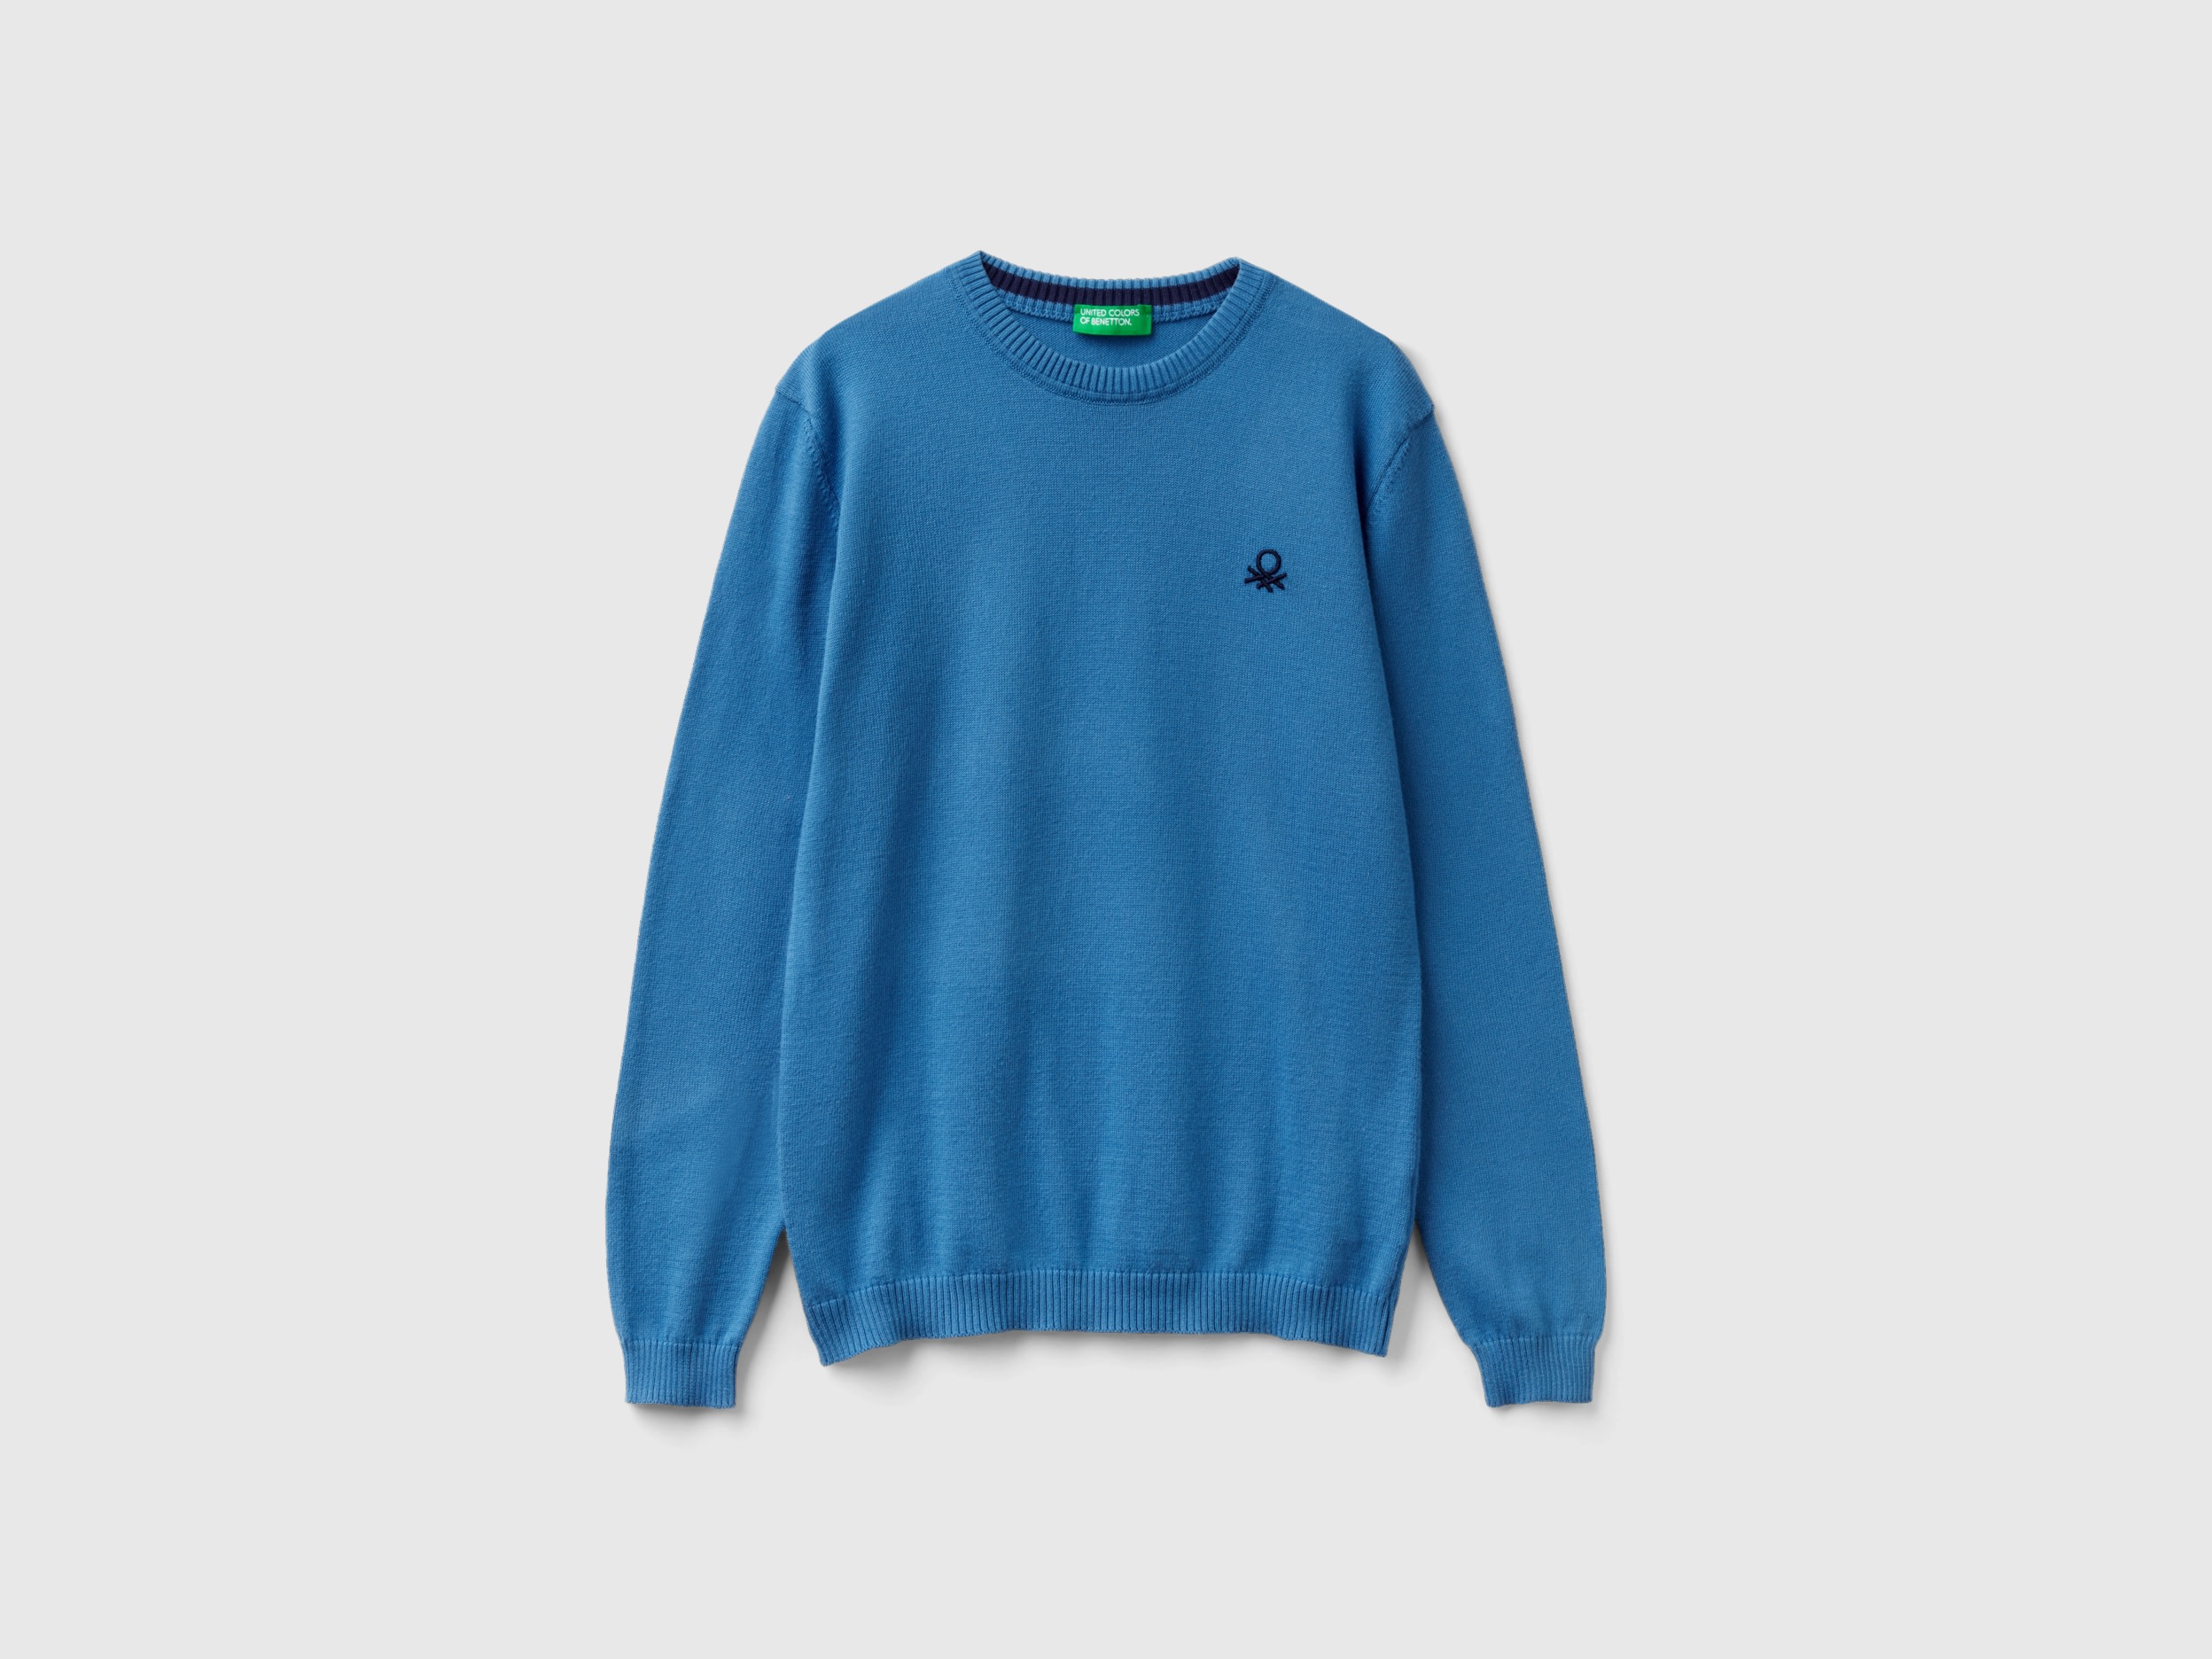 Benetton, Sweater In Pure Cotton With Logo, size M, Blue, Kids